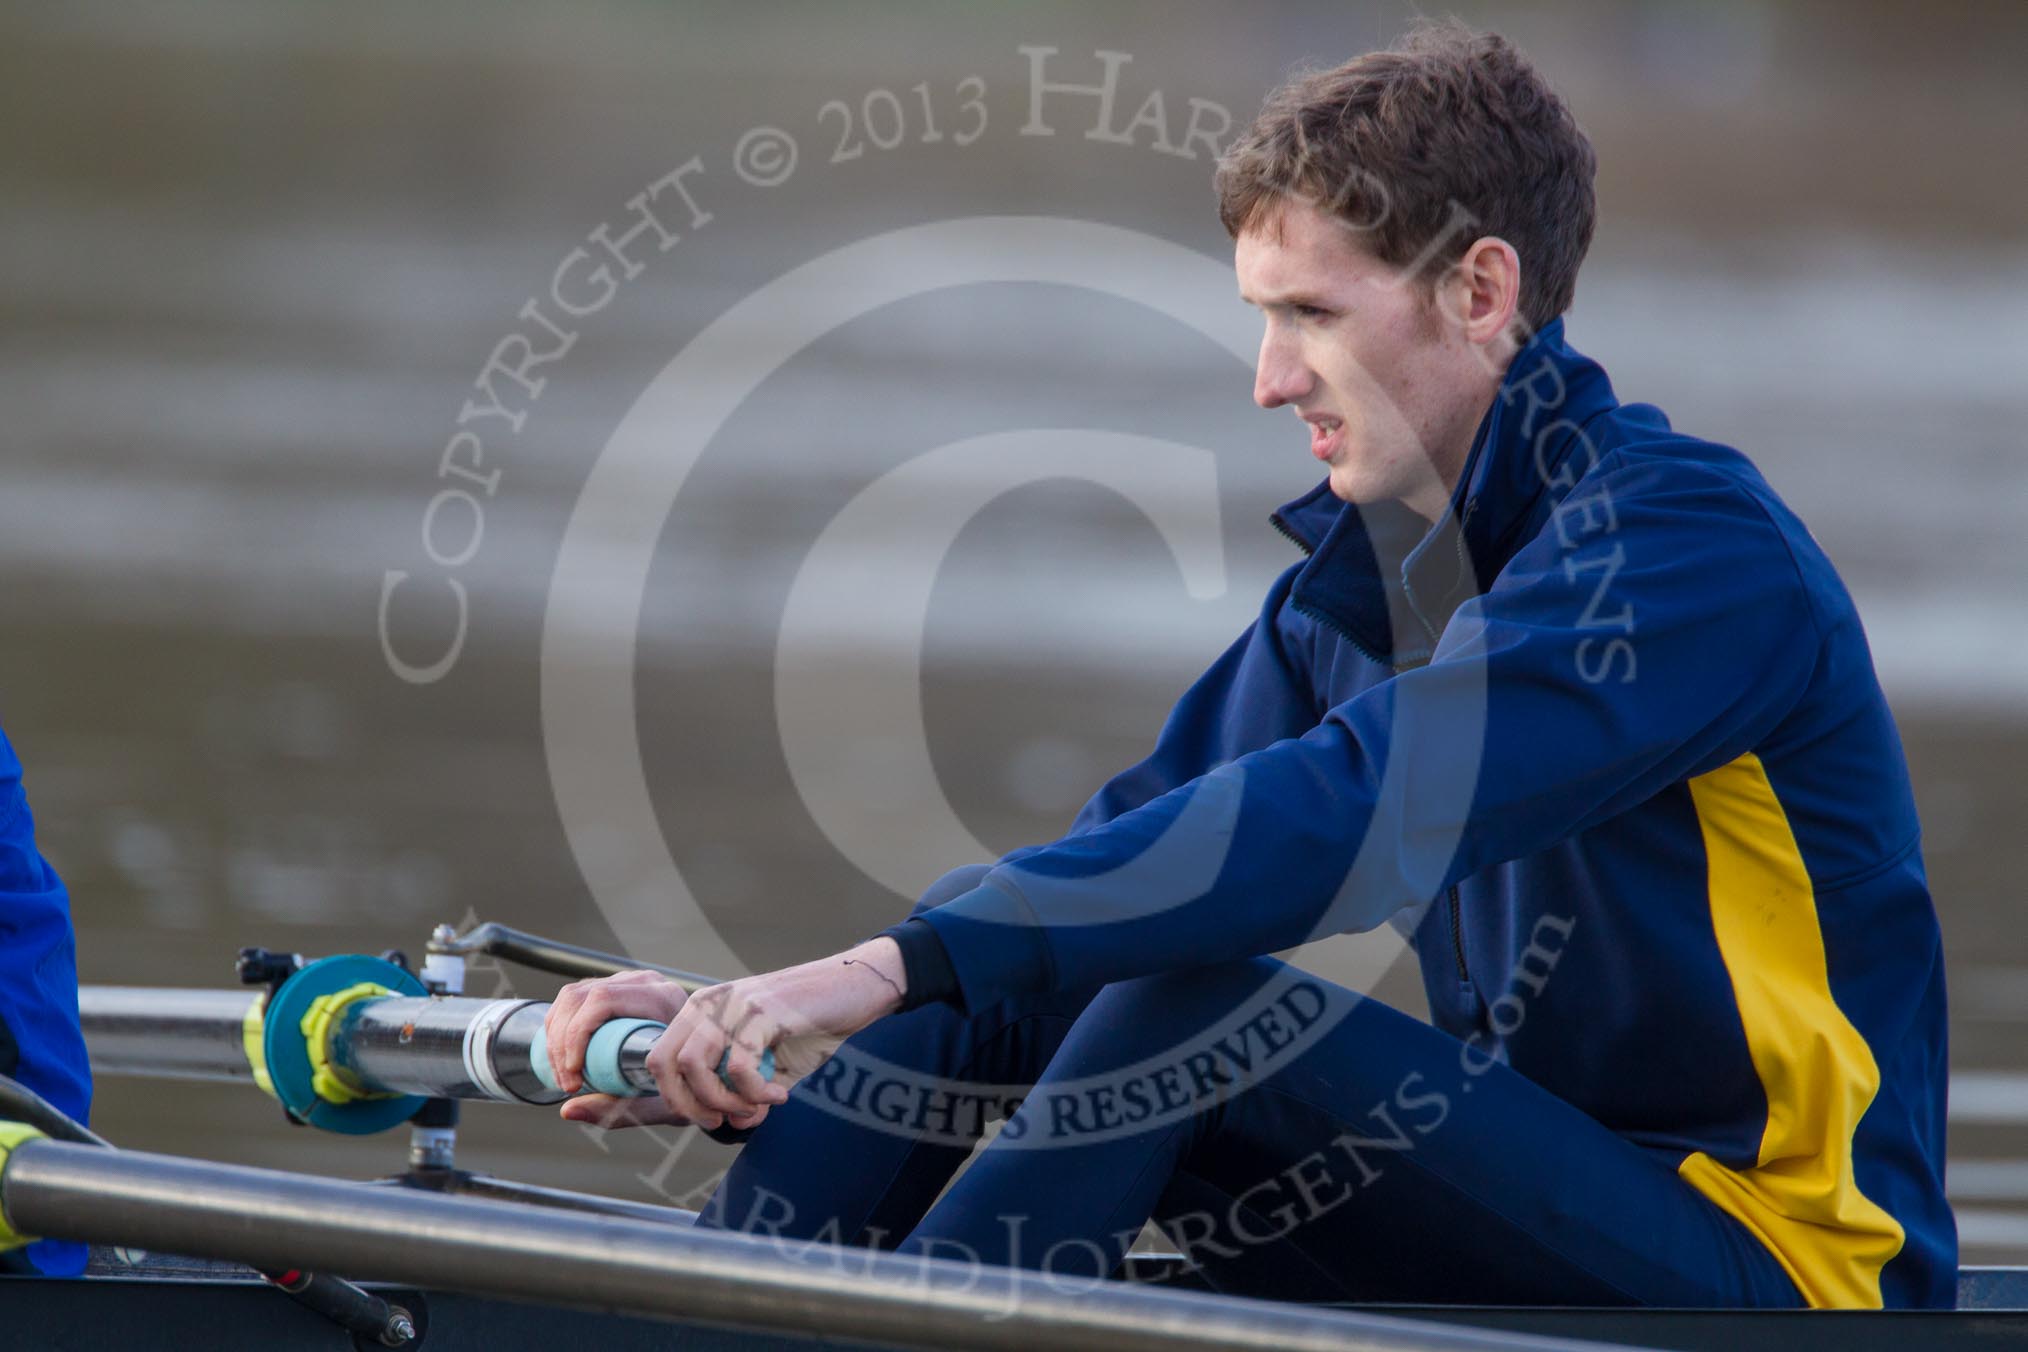 The Boat Race season 2013 - CUWBC training: The OULRC boat - bow James Kirkbride..
River Thames near Remenham,
Henley-on-Thames,
Oxfordshire,
United Kingdom,
on 19 March 2013 at 16:02, image #97